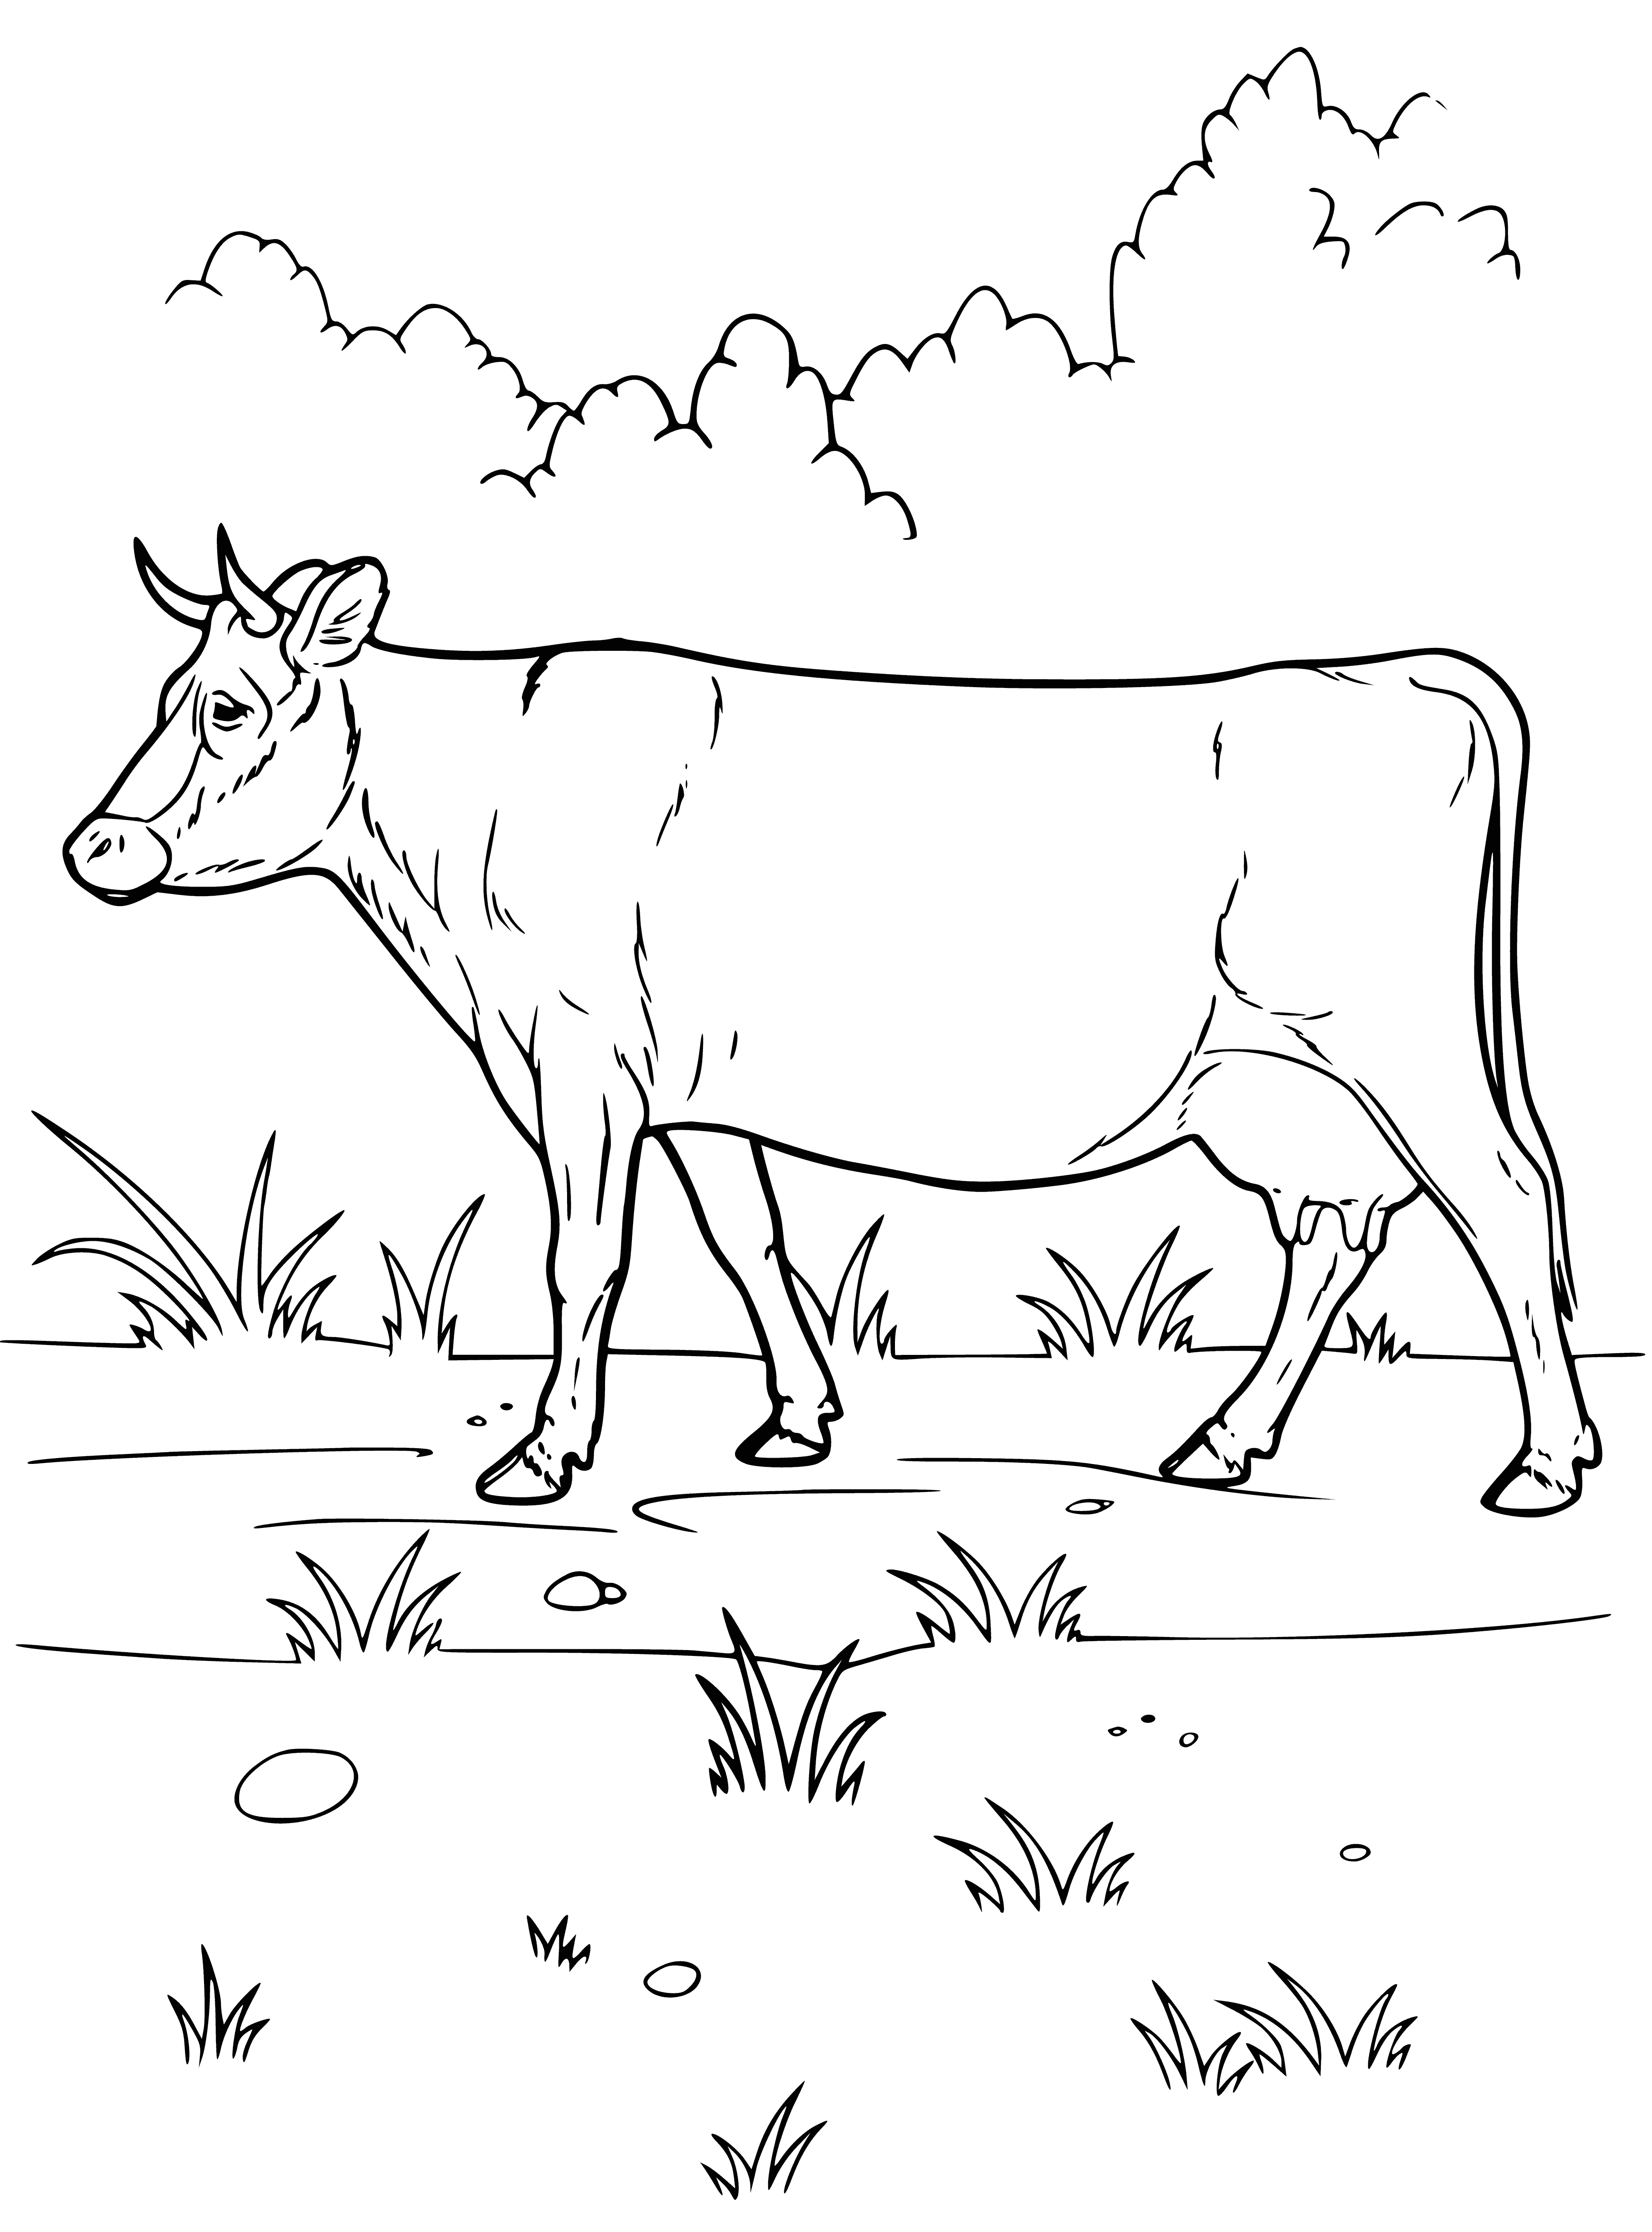 coloring page: Domestic cow has 4 legs, big body, big head, 2 big eyes, is brown & white; eats grass.